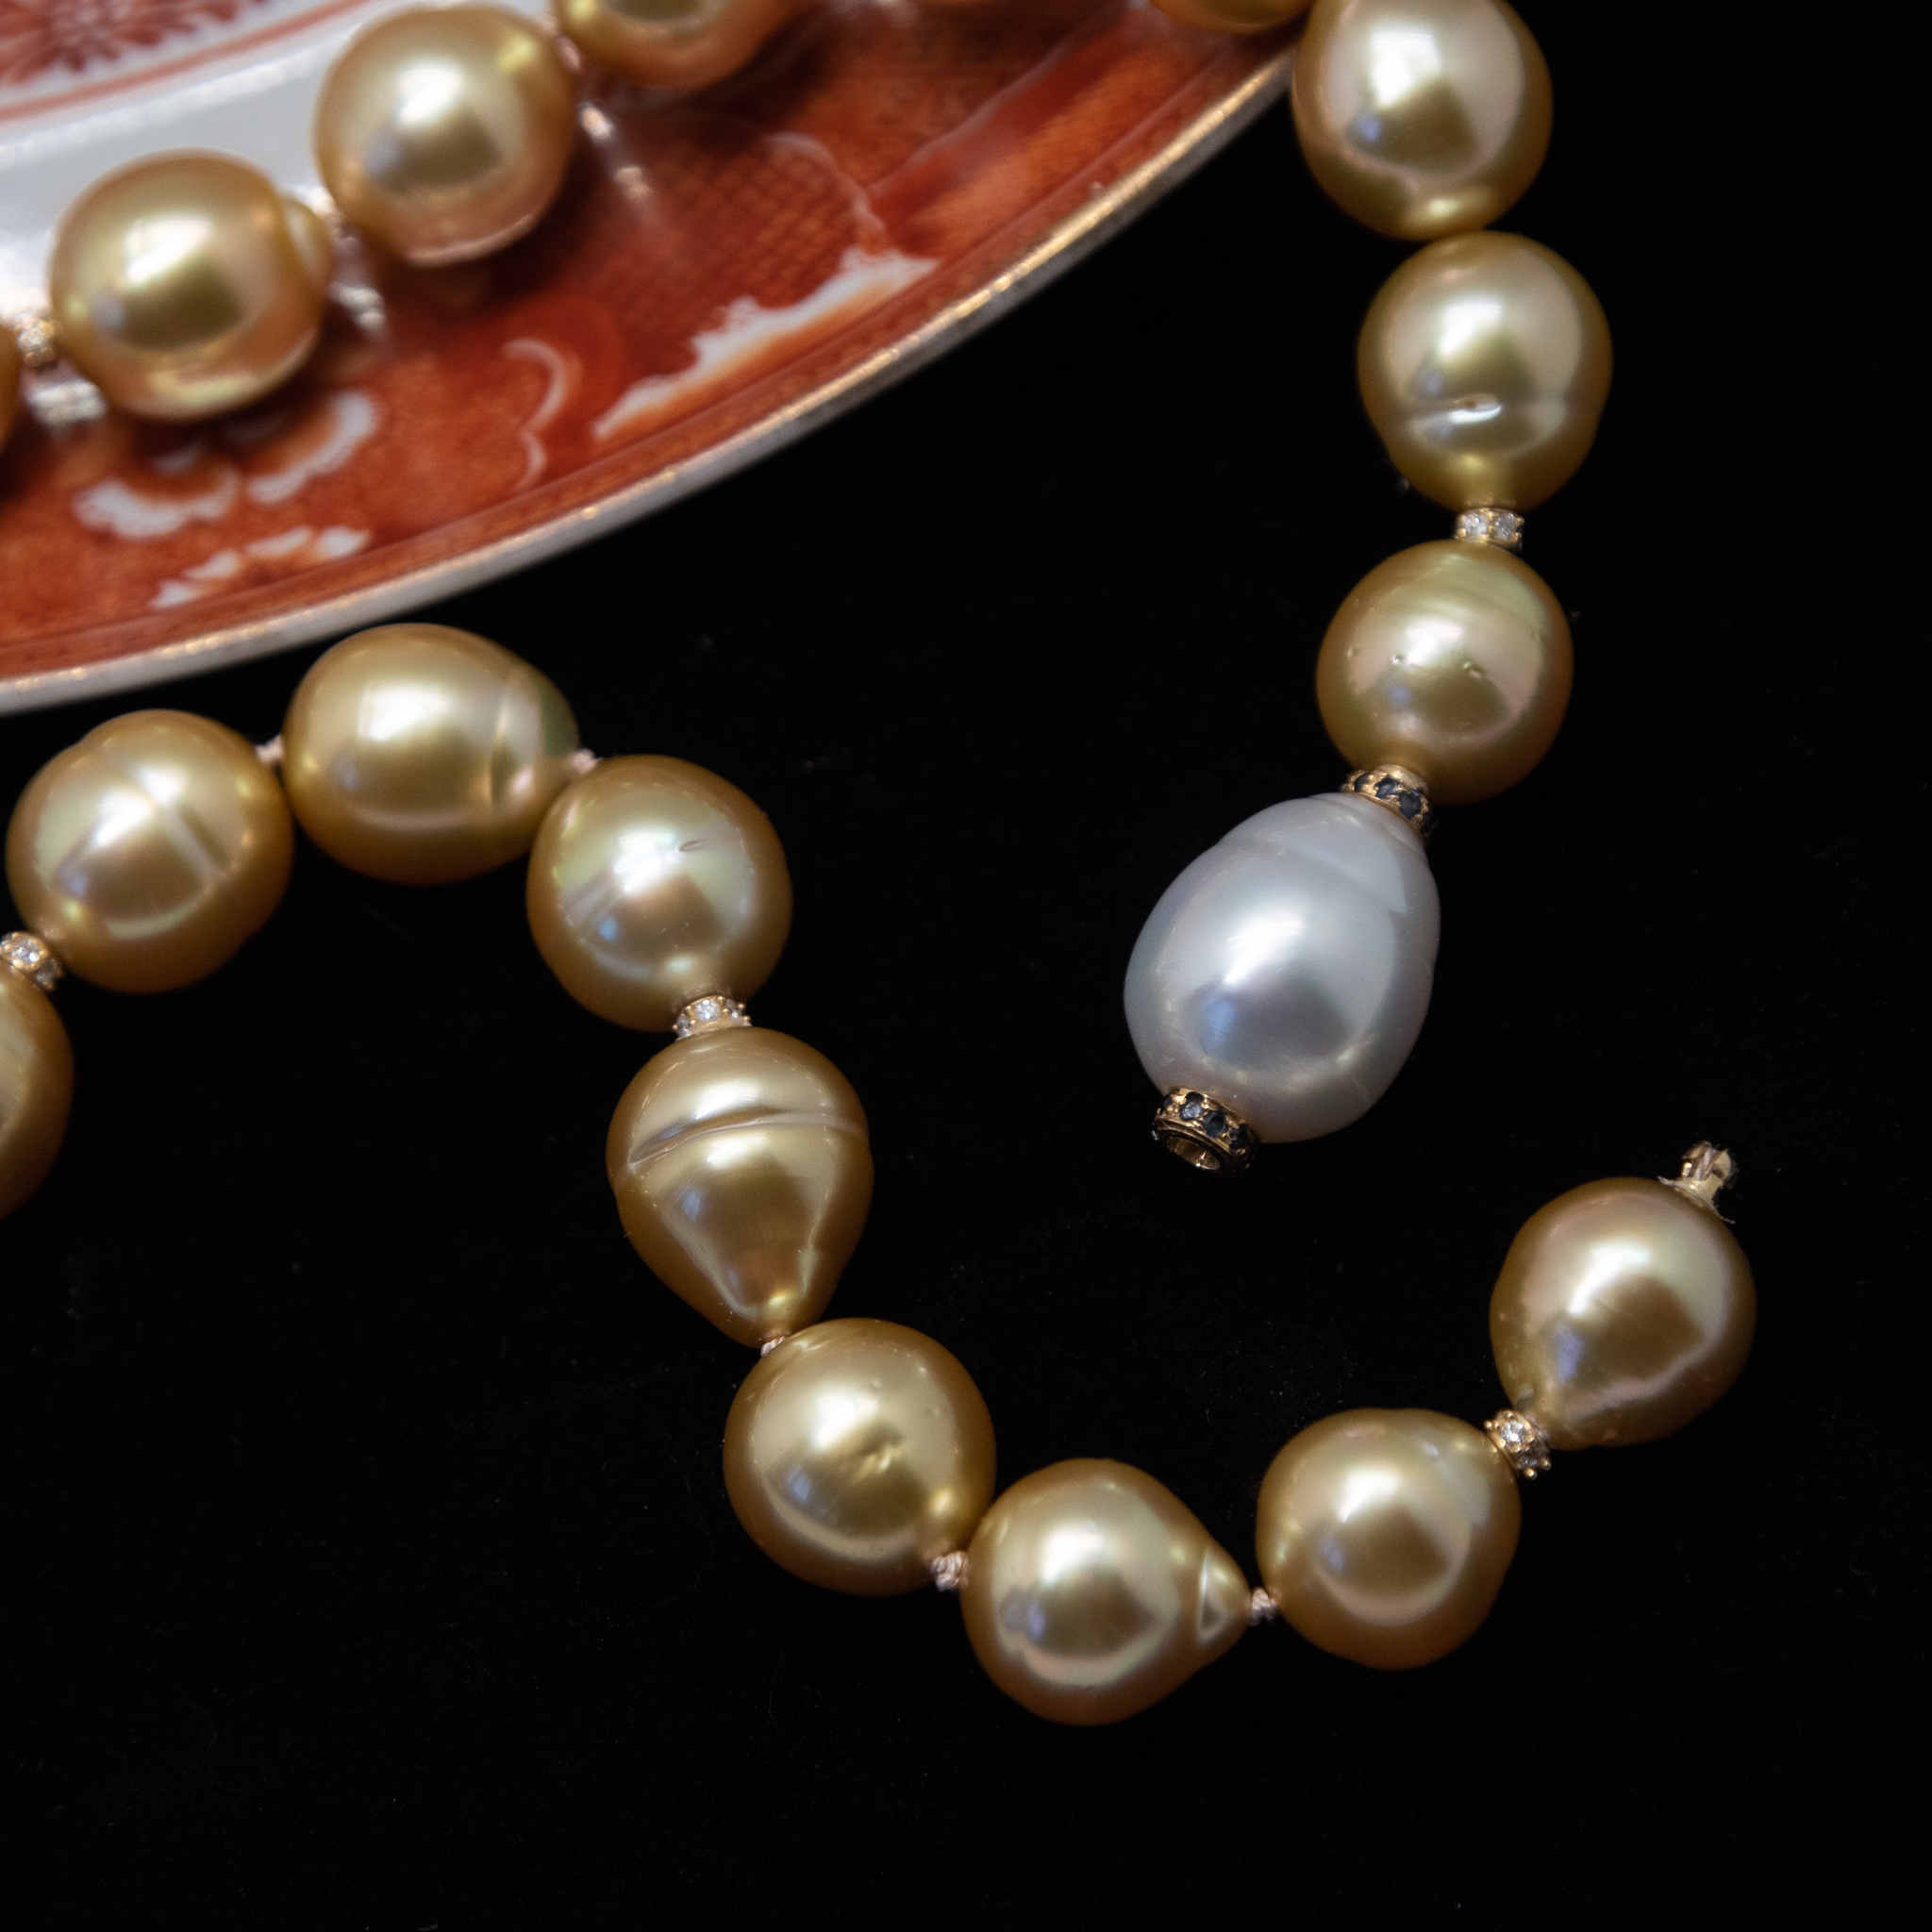 Detail of Australian South Sea pear and sapphirel interchangeable clasp for Golden South Sea pearl choker